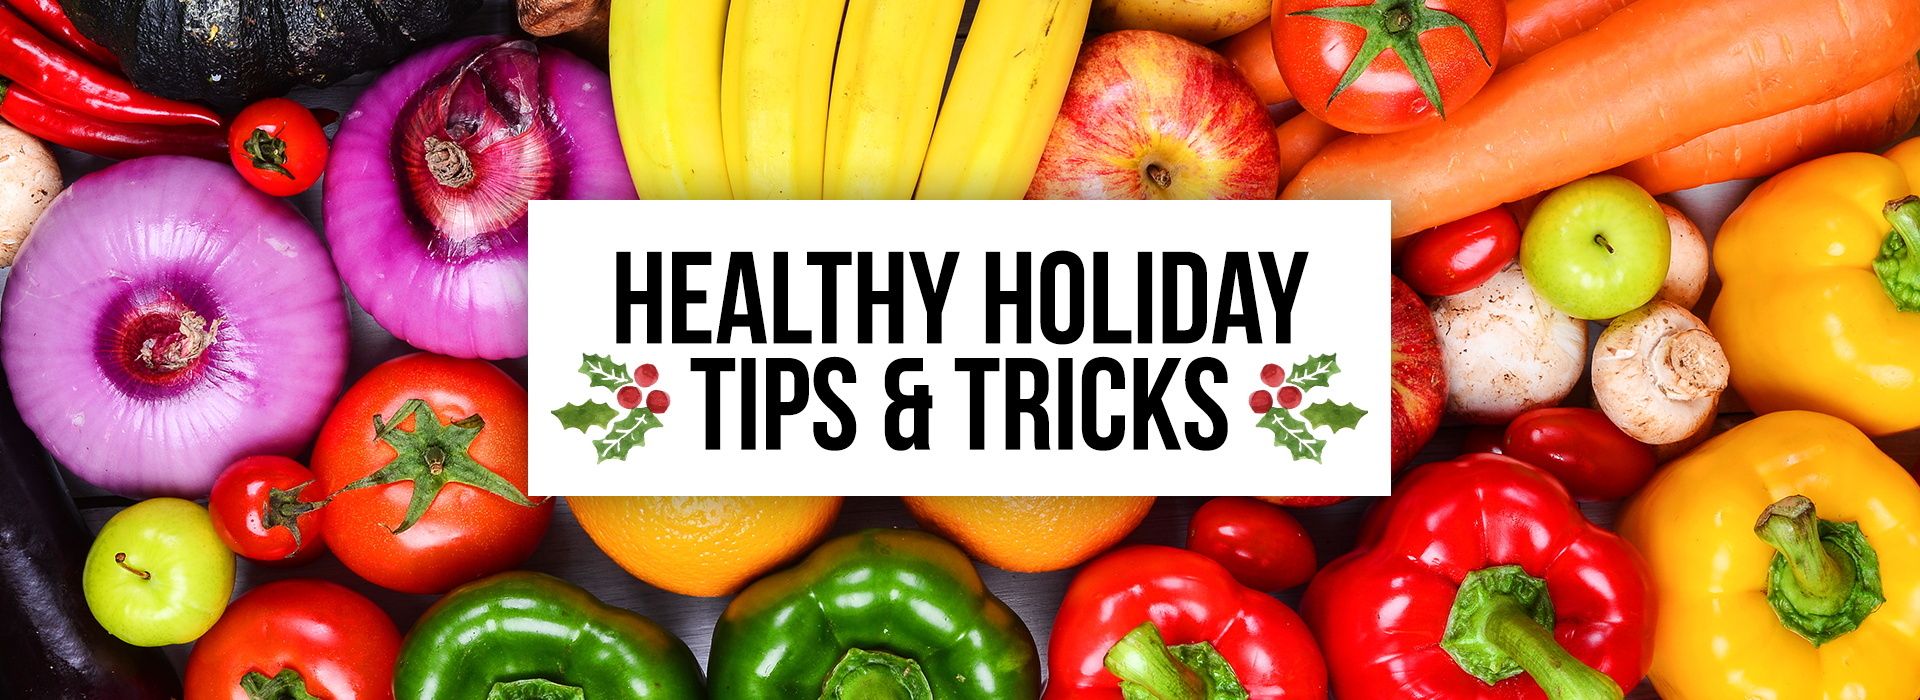 5 Tips to Avoid Weight Gain this Holiday Season